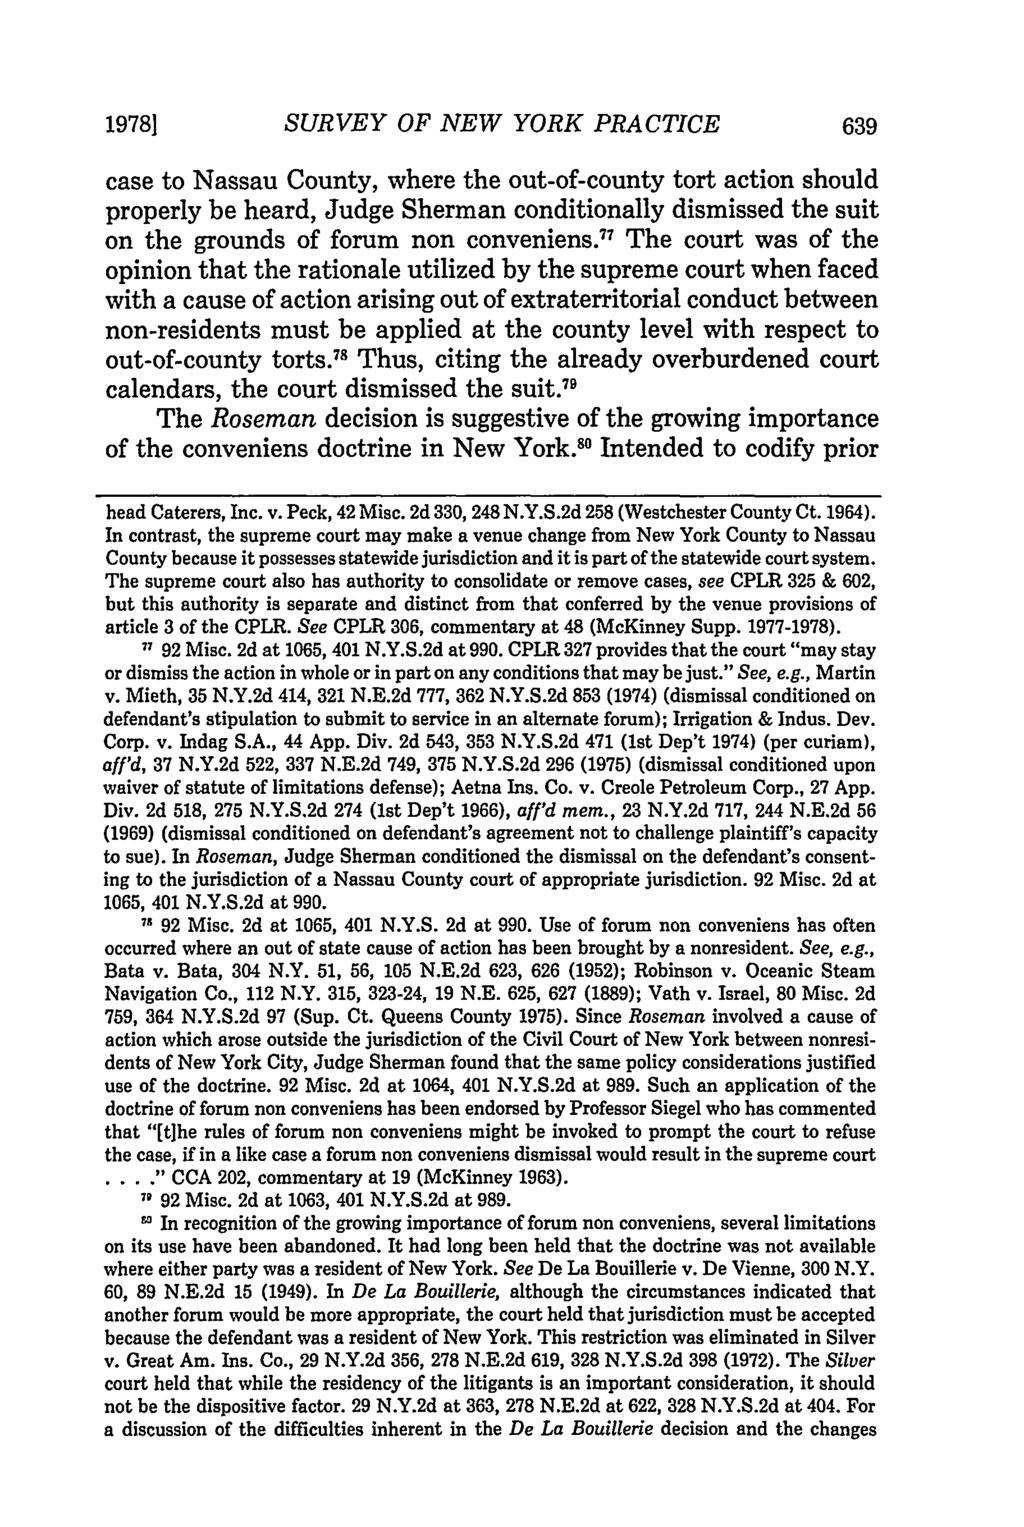 19781 SURVEY OF NEW YORK PRACTICE case to Nassau County, where the out-of-county tort action should properly be heard, Judge Sherman conditionally dismissed the suit on the grounds of forum non